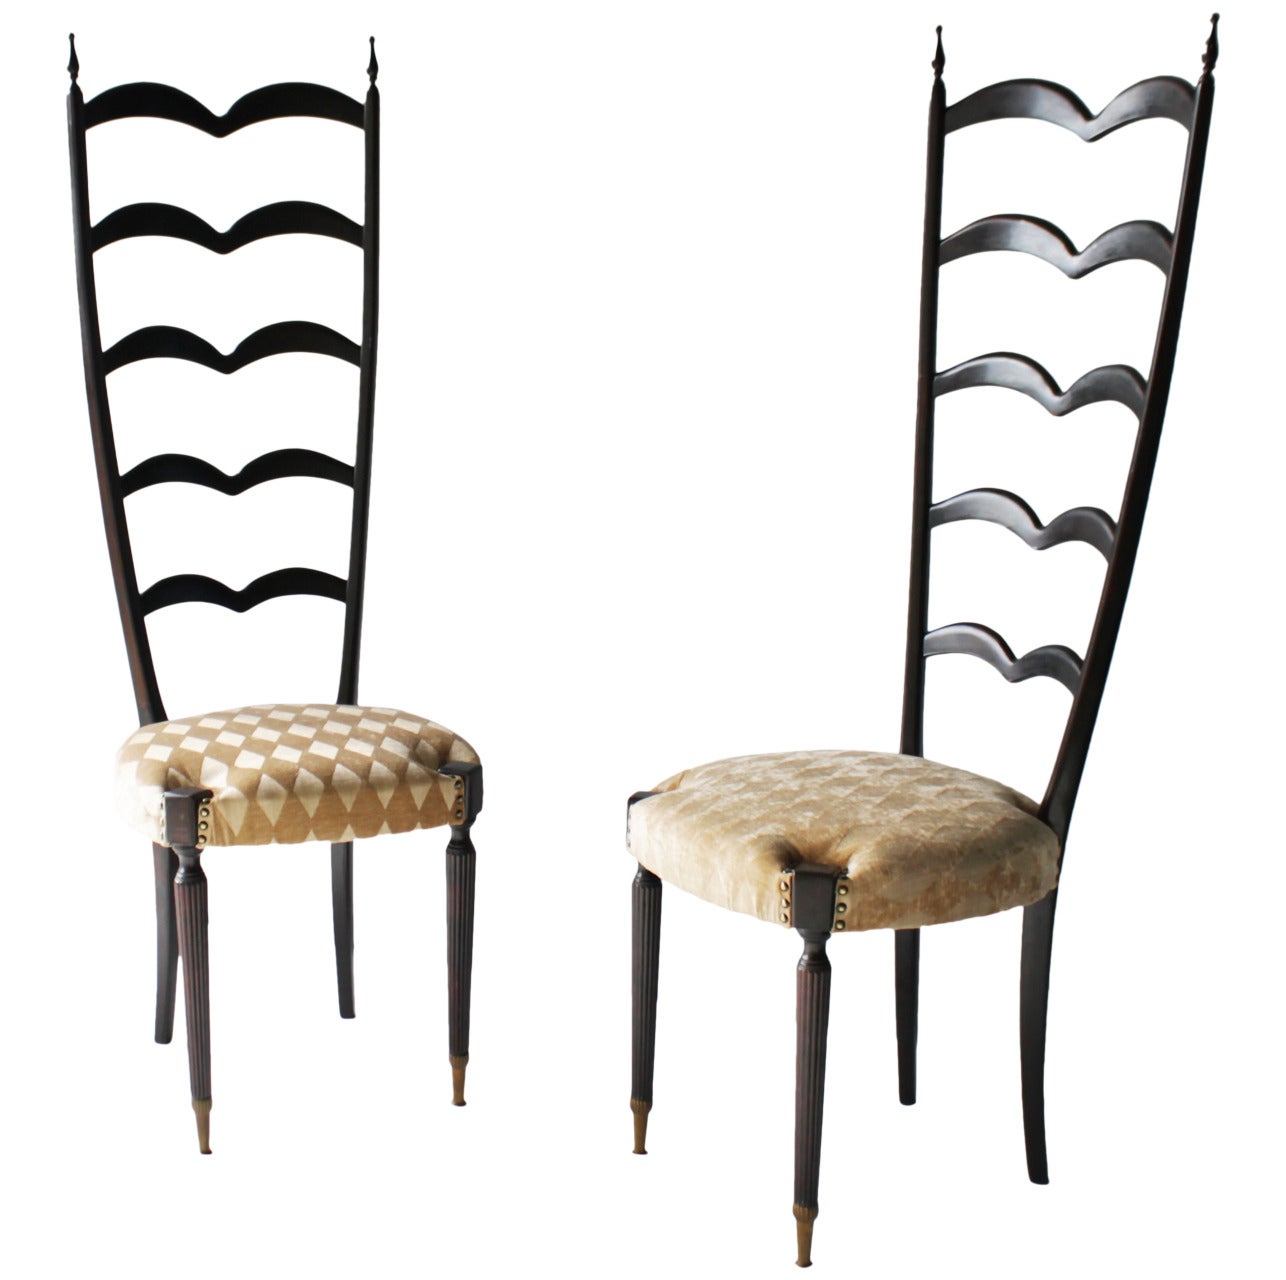 Pair of Highly Decorative Ladder Back Chairs by Paolo Buffa